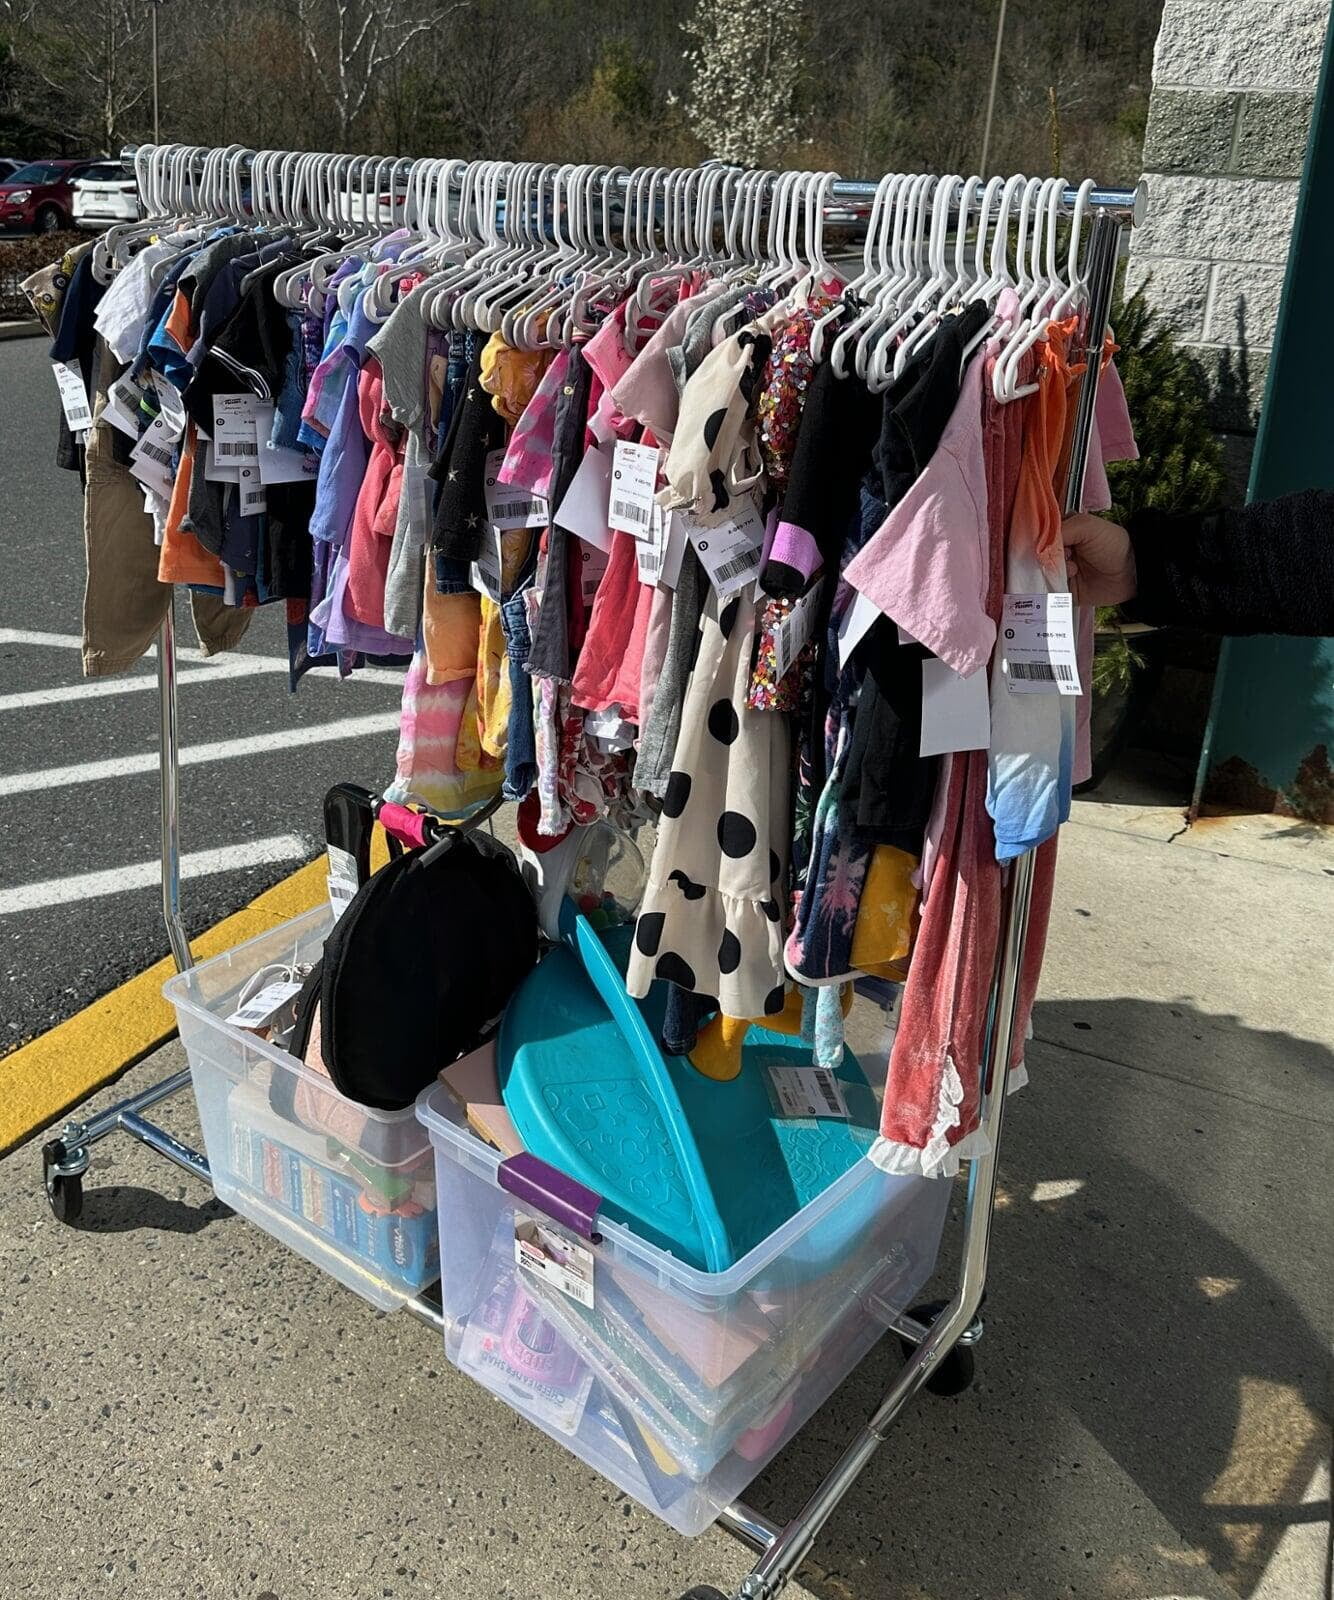 A rolling rack of clothing and other baby/children items in bins being wheeled into  the JBF sale at Body Zone in Wyomissing, PA.